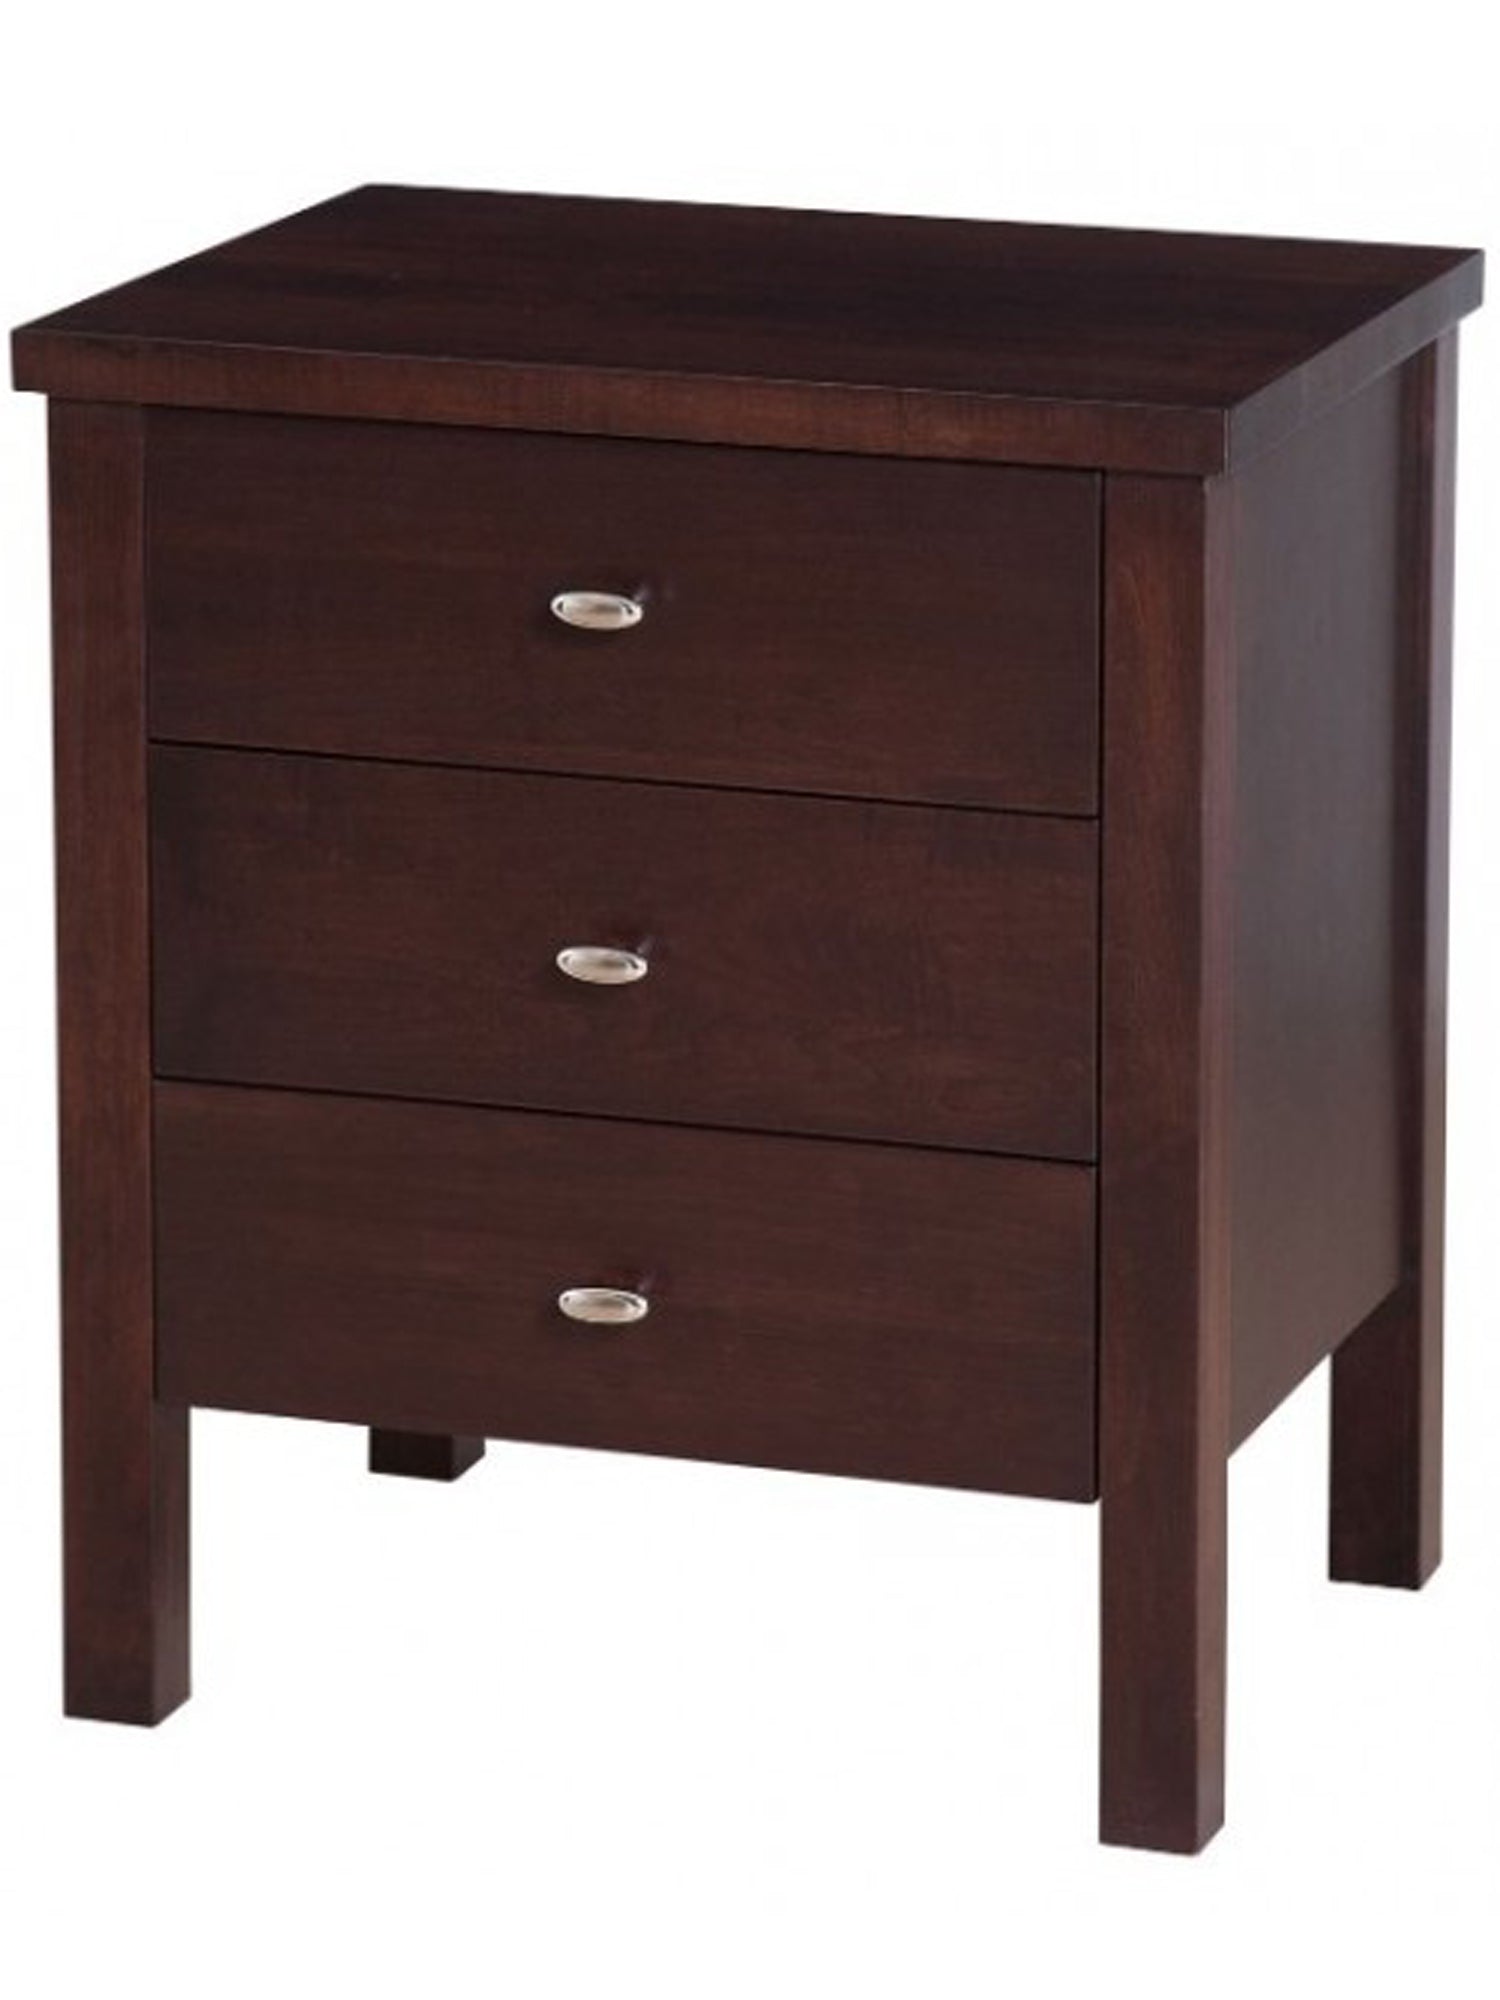 Yaletown nightstand by Woodworks - solid wood, locally built, Canadian made|